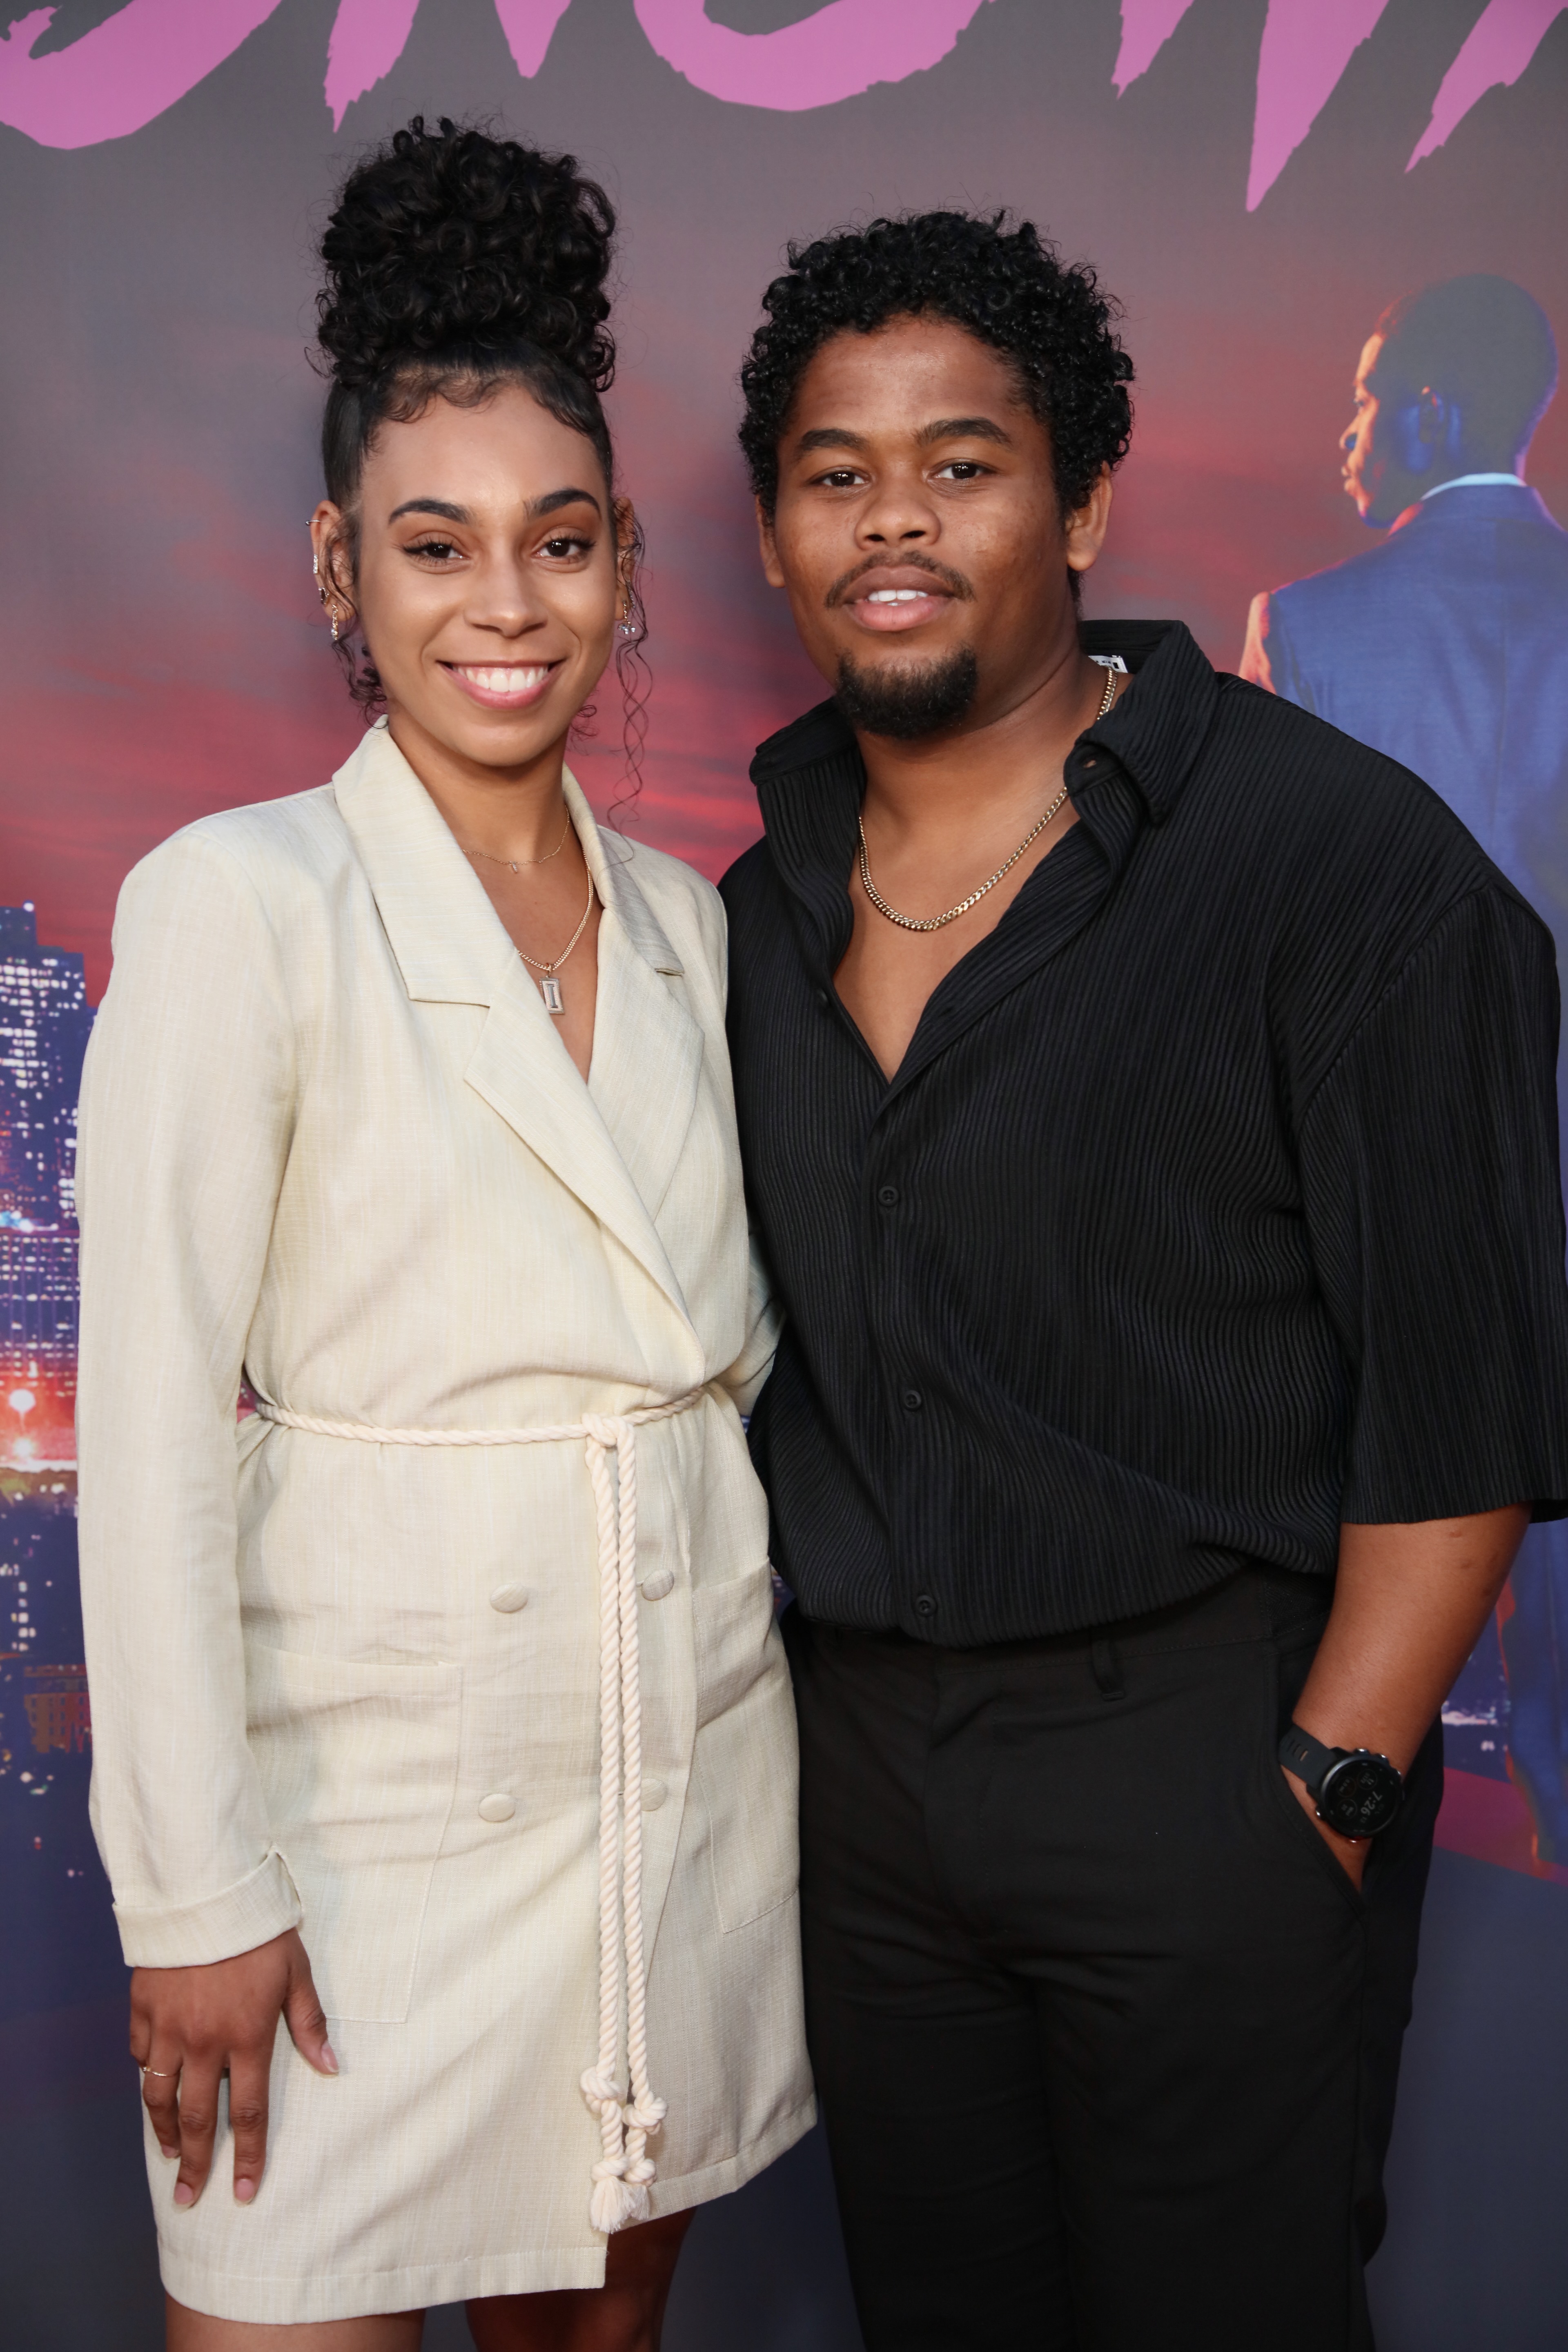 Isaiah John and his wife Hasha John attend the 2022 Pan African Film And Arts Festival - FX's "Snowfall" Season 5 Finale at Cinemark Baldwin Hills on April 20, 2022 in Los Angeles, California | Source: Getty Images